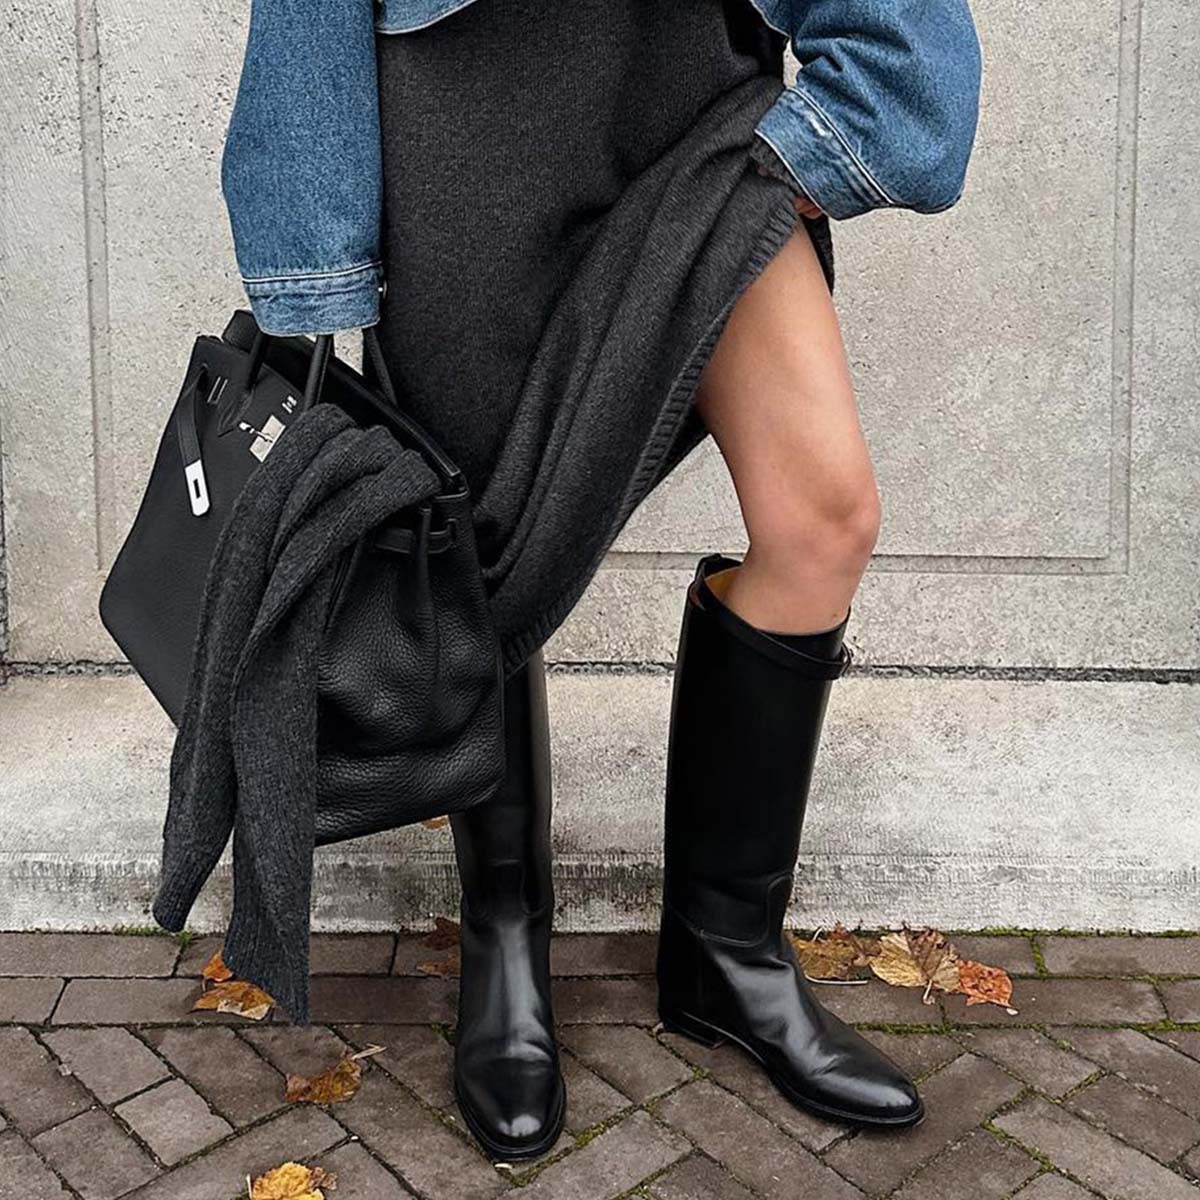 Outfit Black Knee High Boots  Leather Knee High Boots Outfit